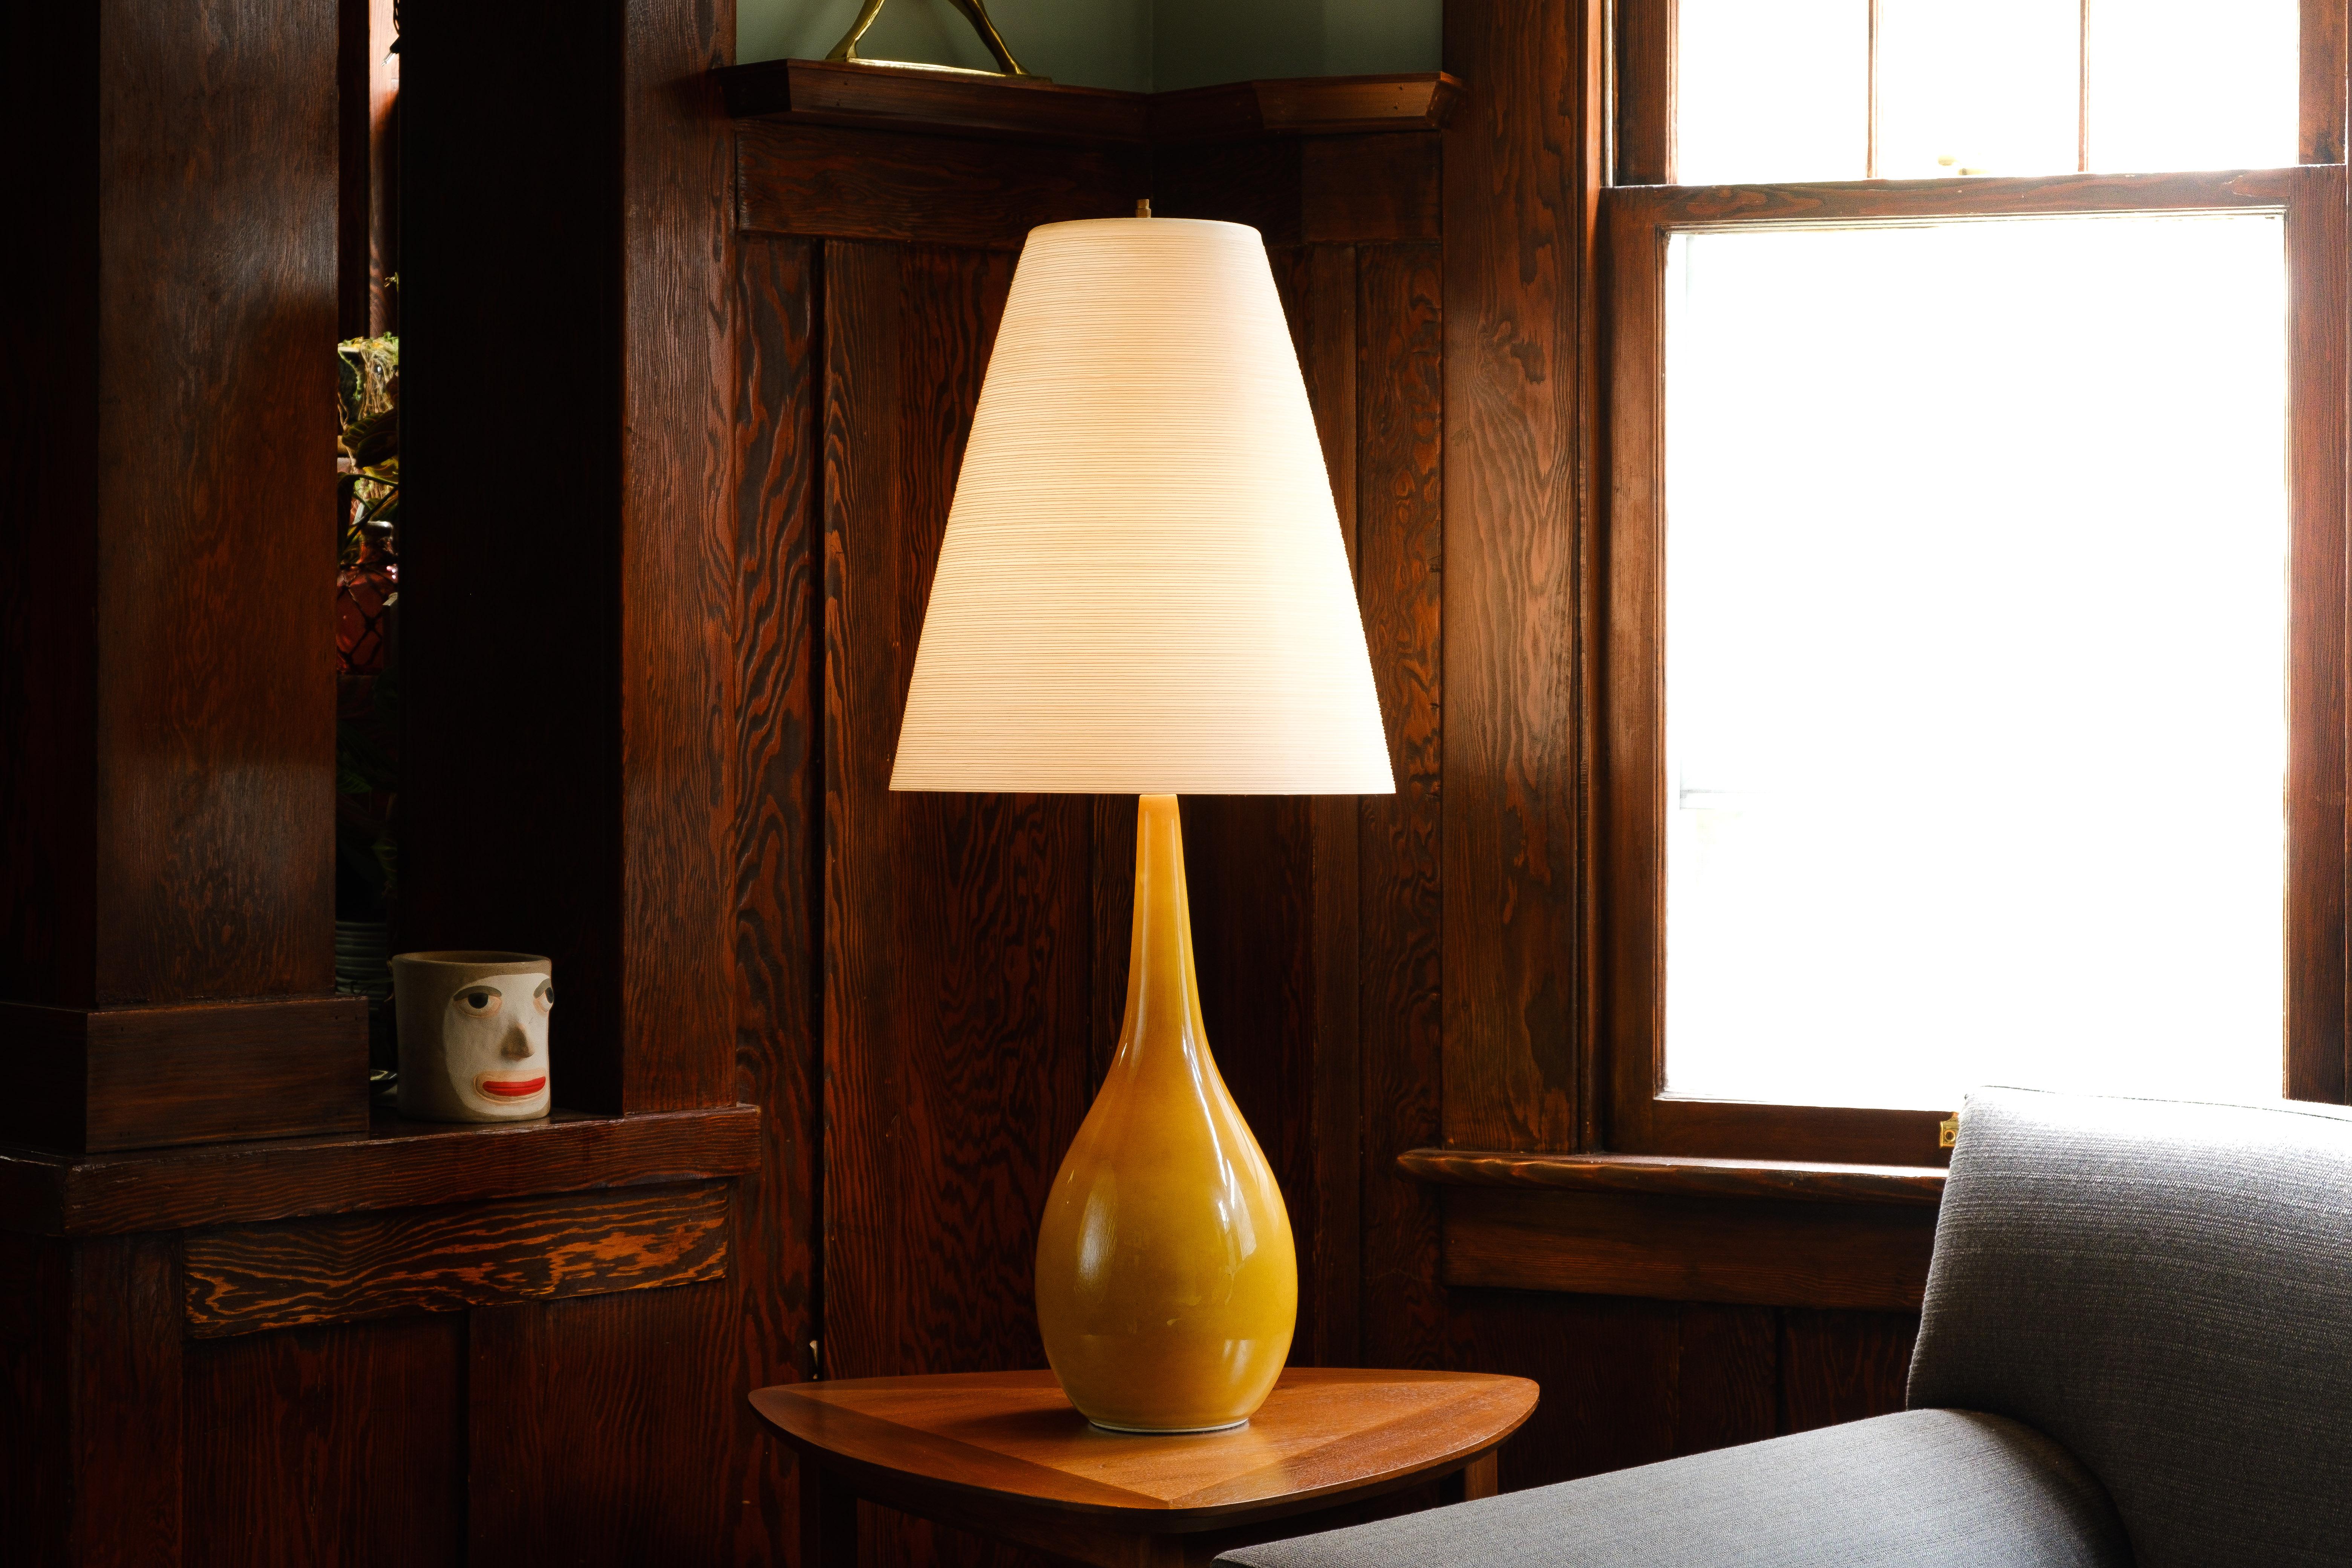 What is it?
—
A signed Lotte Bostlund lamp from the 1970s. Bright yellow glaze on a very tall ceramic body. Comes with the original cord wrapped fiberglass shade. 

Lotte Lamps were developed by the husband and wife team of Lotte and Gunnar